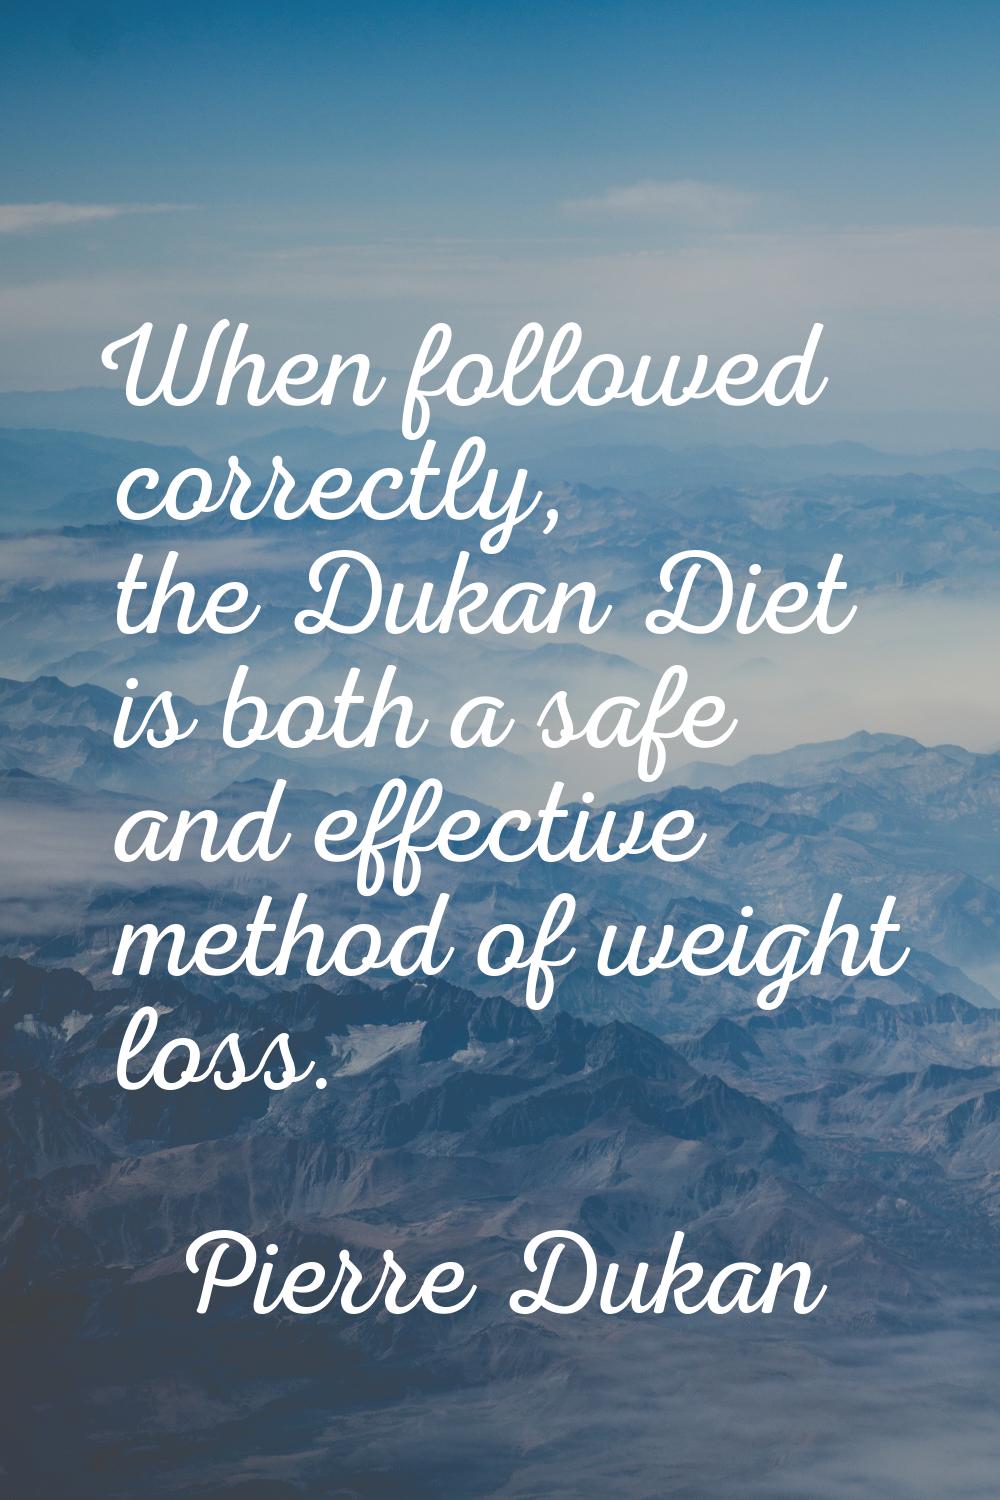 When followed correctly, the Dukan Diet is both a safe and effective method of weight loss.